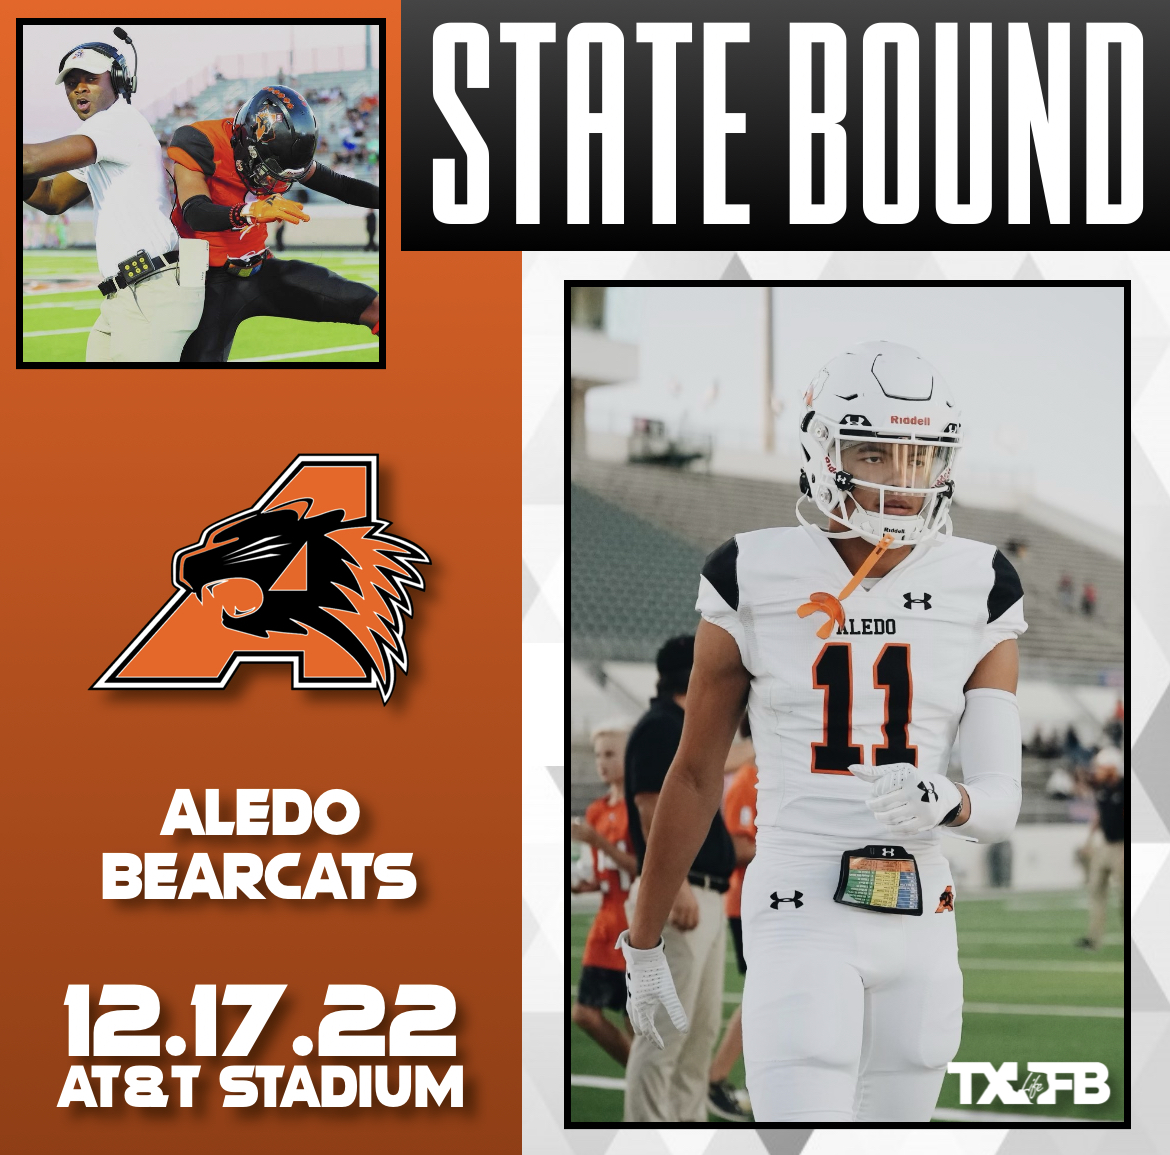 🏆 The Aledo Bearcats Have Punched Their Ticket To State! #txhsfb